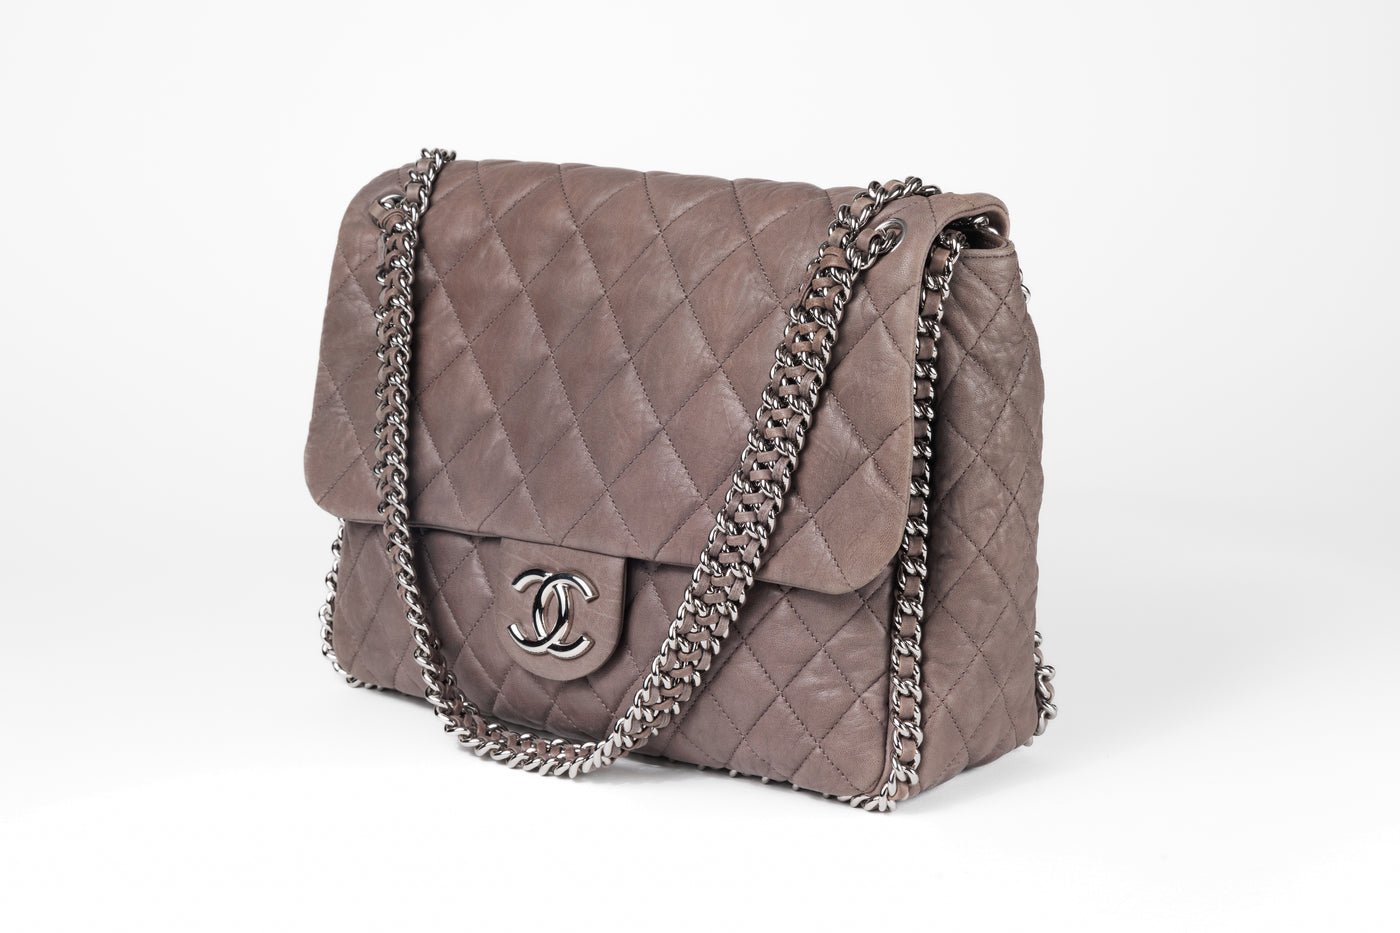 Chanel Taupe Gray Washed Lambskin Chain Around Luxe Flap Bag with Silver Hardware